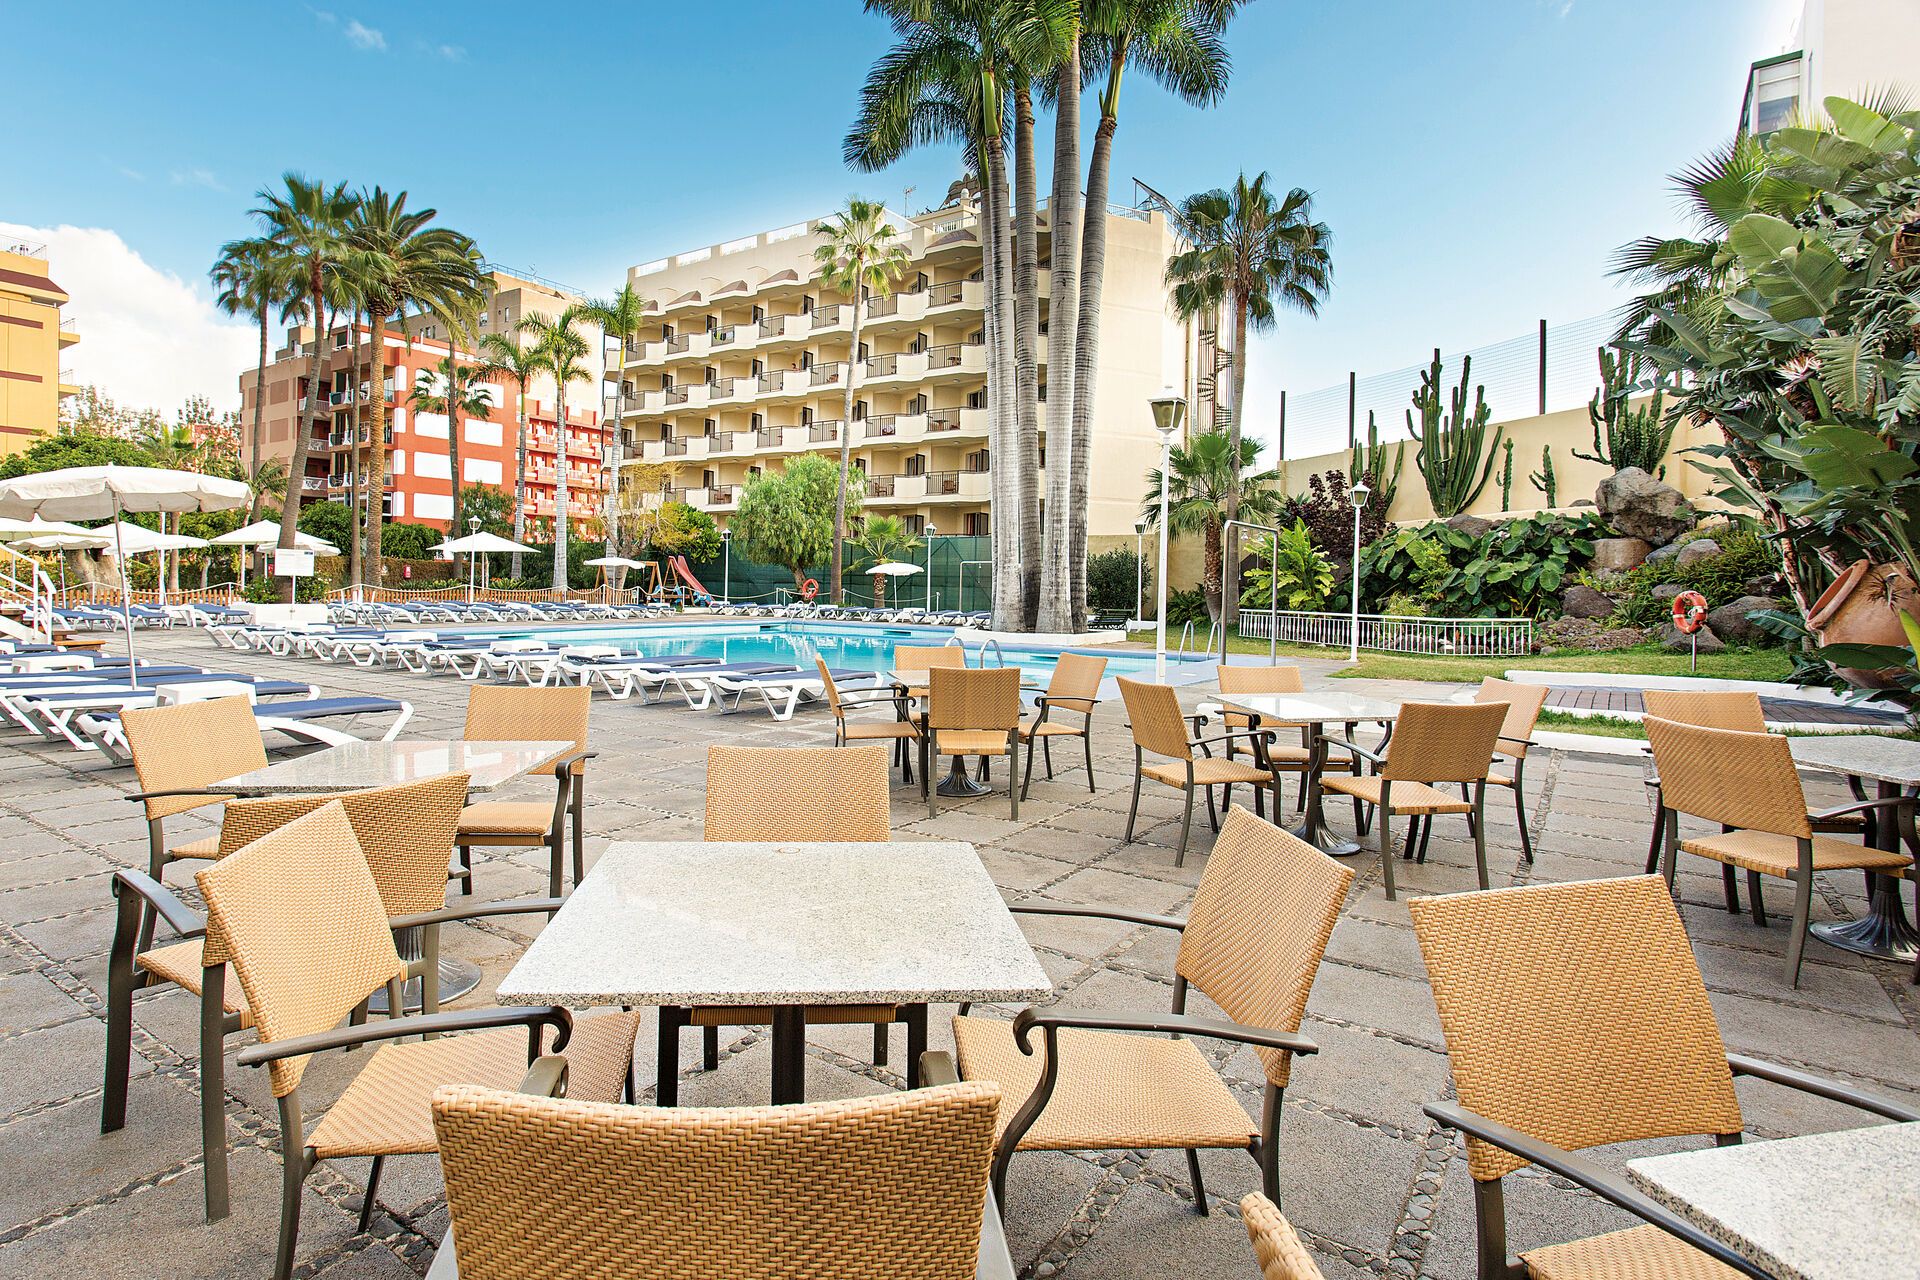 Canaries - Tenerife - Espagne - Hotel Be Live Adults Only Tenerife 4*